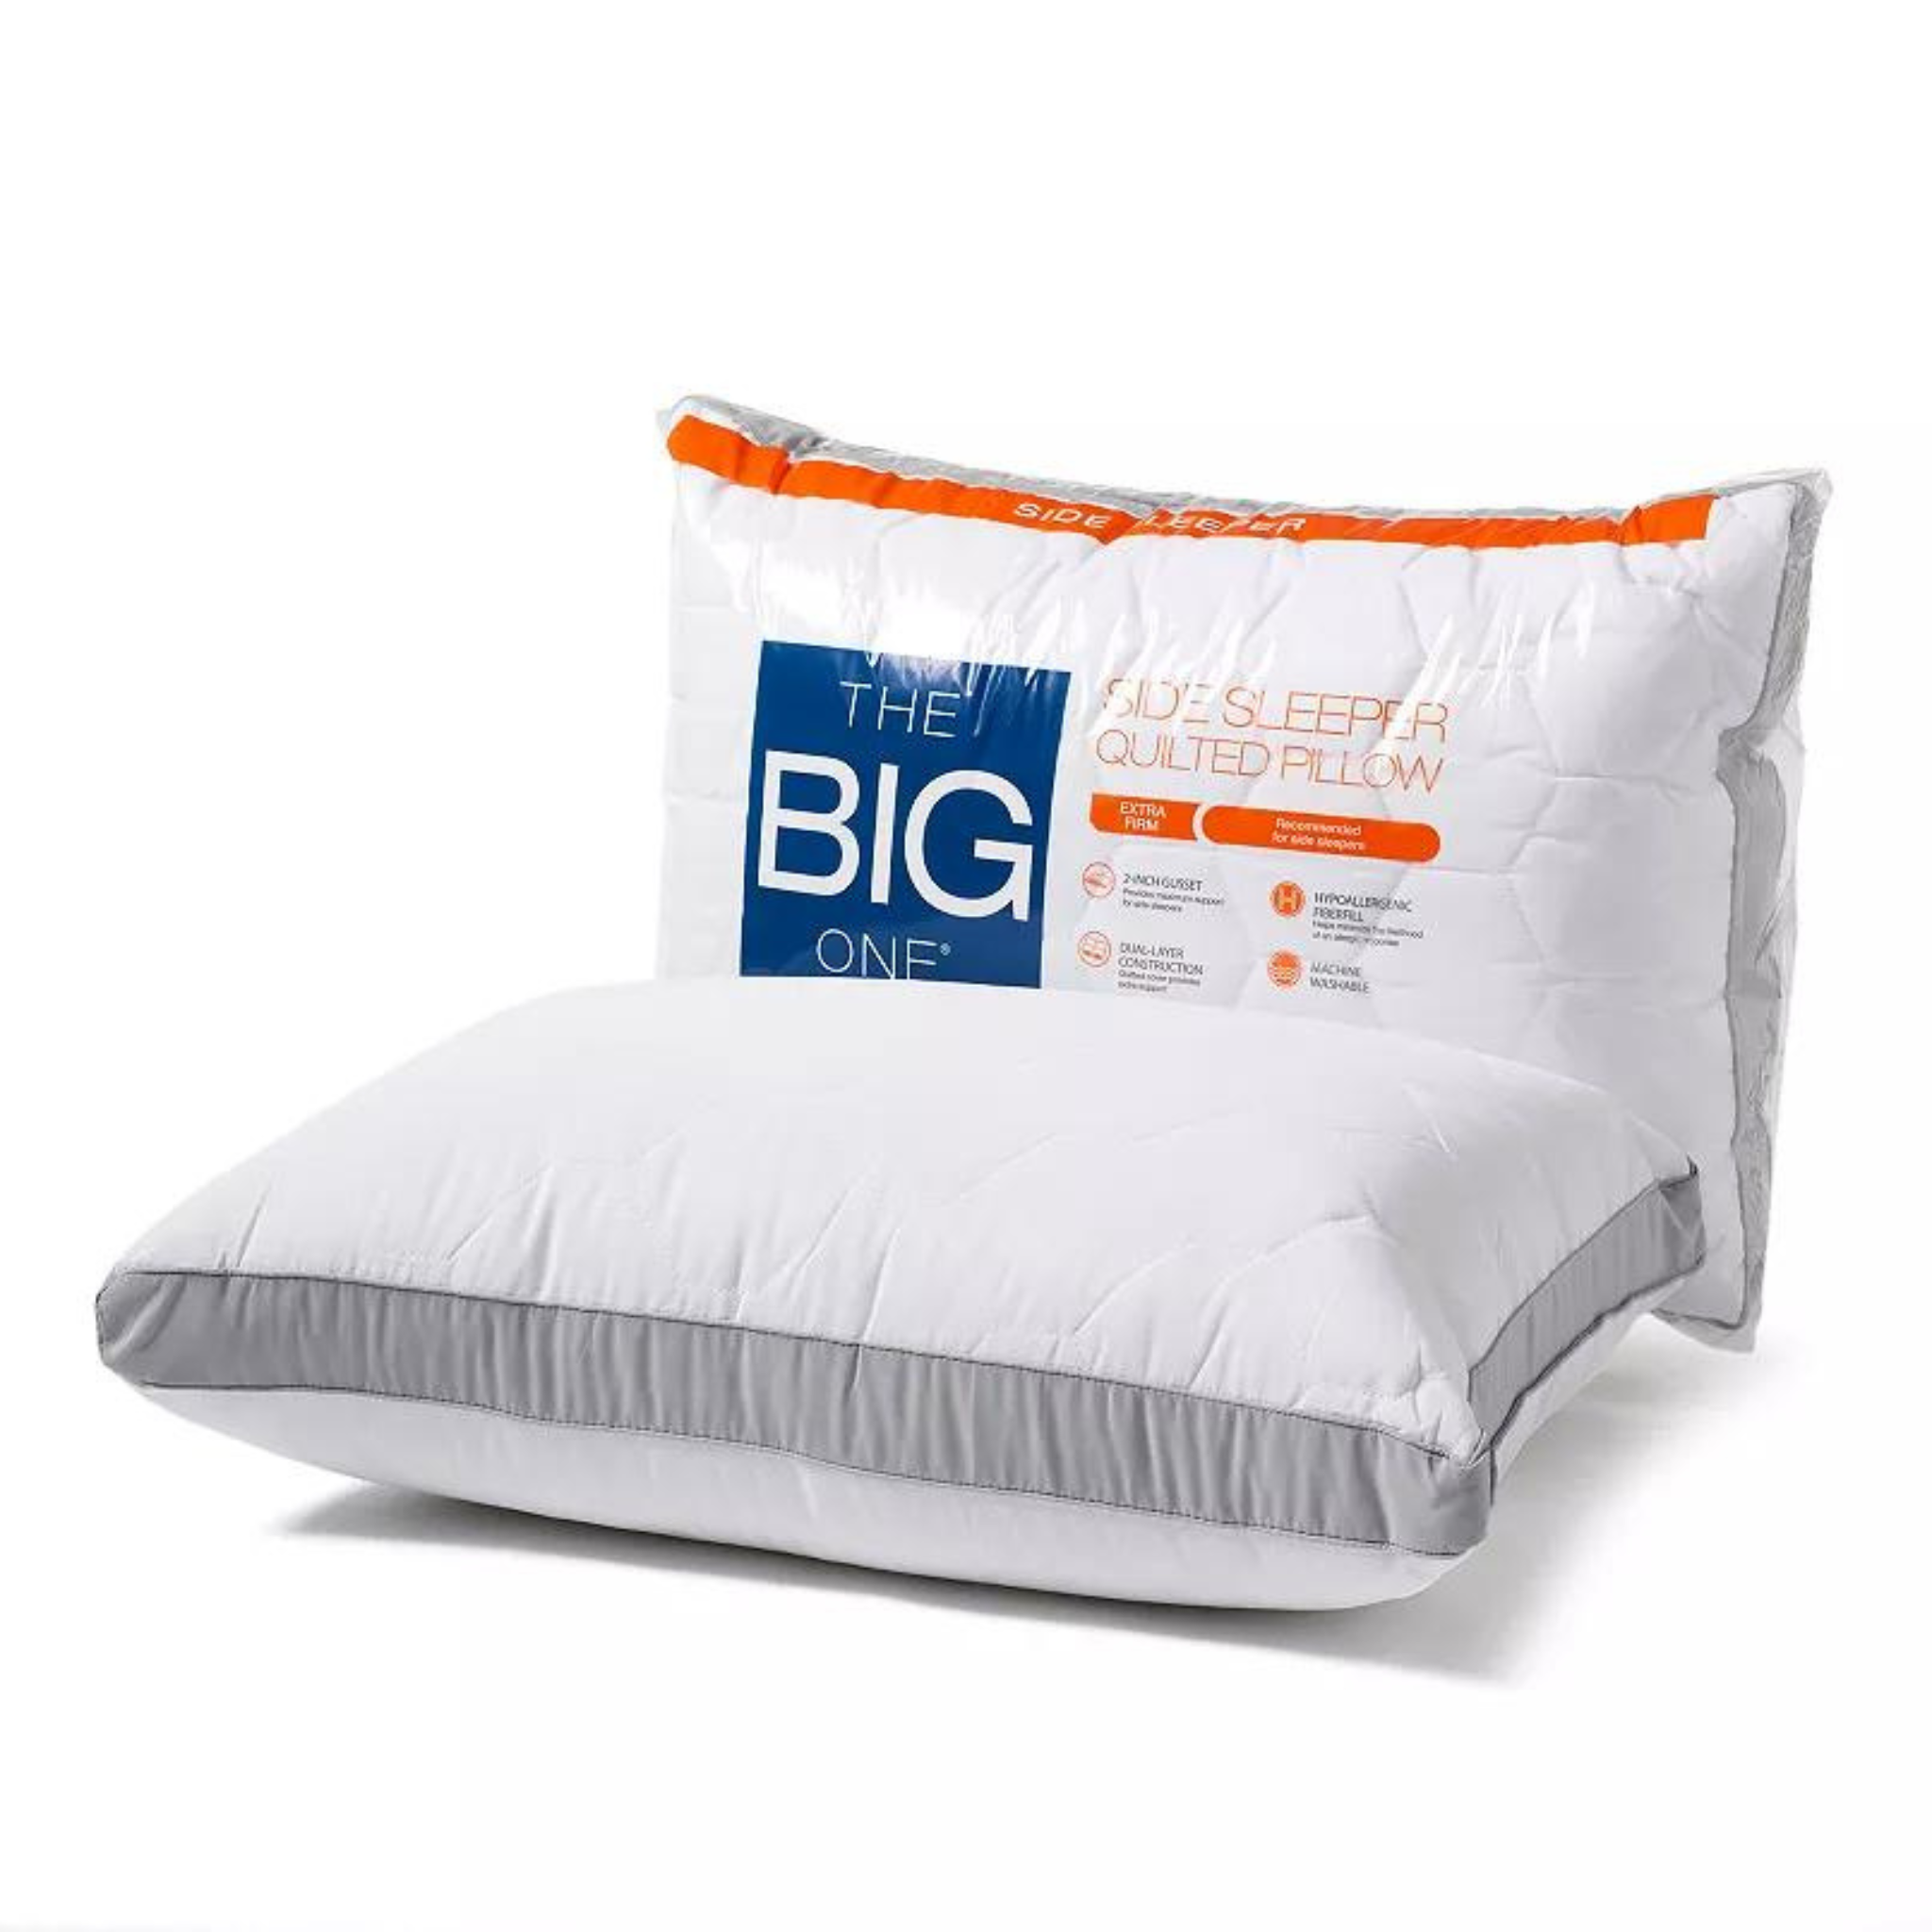 The Big One Quilted Side Sleeper Bed Pillow (Standard/Queen)